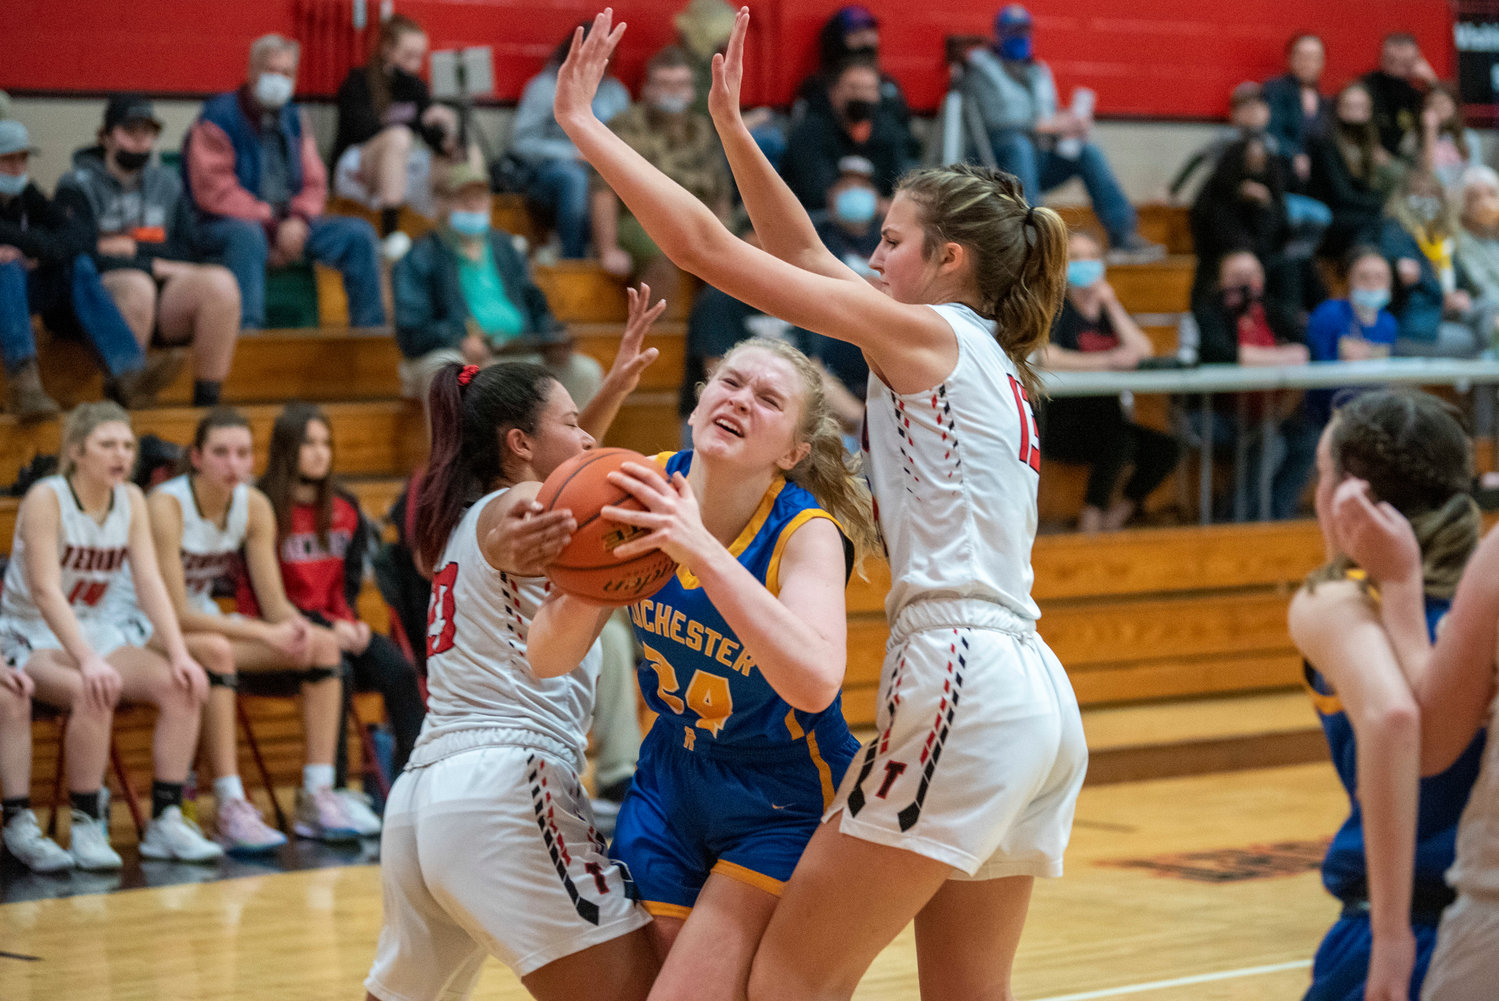 Rochester's Delany Winter (24) looks to drive through a Tenino double team on Dec. 2.